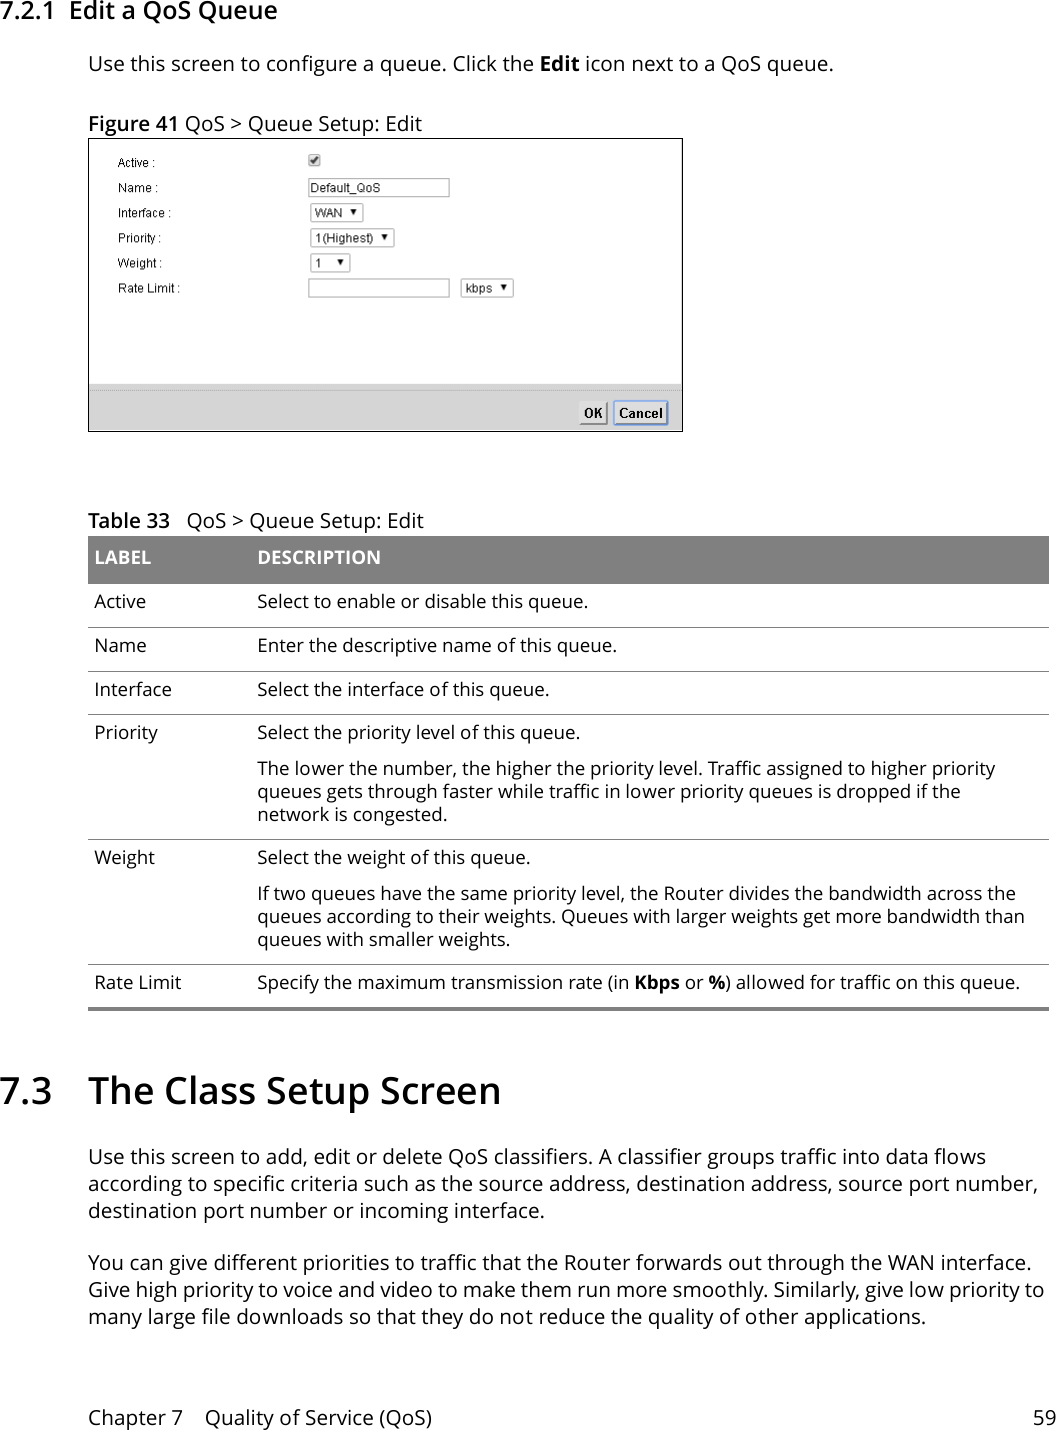 Chapter 7    Quality of Service (QoS) 597.2.1  Edit a QoS Queue Use this screen to configure a queue. Click the Edit icon next to a QoS queue. Figure 41 QoS &gt; Queue Setup: Edit  Table 33   QoS &gt; Queue Setup: Edit LABEL DESCRIPTIONActive Select to enable or disable this queue.Name Enter the descriptive name of this queue.Interface Select the interface of this queue.Priority Select the priority level of this queue.The lower the number, the higher the priority level. Traffic assigned to higher priority queues gets through faster while traffic in lower priority queues is dropped if the network is congested.Weight Select the weight of this queue. If two queues have the same priority level, the Router divides the bandwidth across the queues according to their weights. Queues with larger weights get more bandwidth than queues with smaller weights.Rate Limit Specify the maximum transmission rate (in Kbps or %) allowed for traffic on this queue. 7.3   The Class Setup Screen   Use this screen to add, edit or delete QoS classifiers. A classifier groups traffic into data flows according to specific criteria such as the source address, destination address, source port number, destination port number or incoming interface. You can give different priorities to traffic that the Router forwards out through the WAN interface. Give high priority to voice and video to make them run more smoothly. Similarly, give low priority to many large file downloads so that they do not reduce the quality of other applications. 